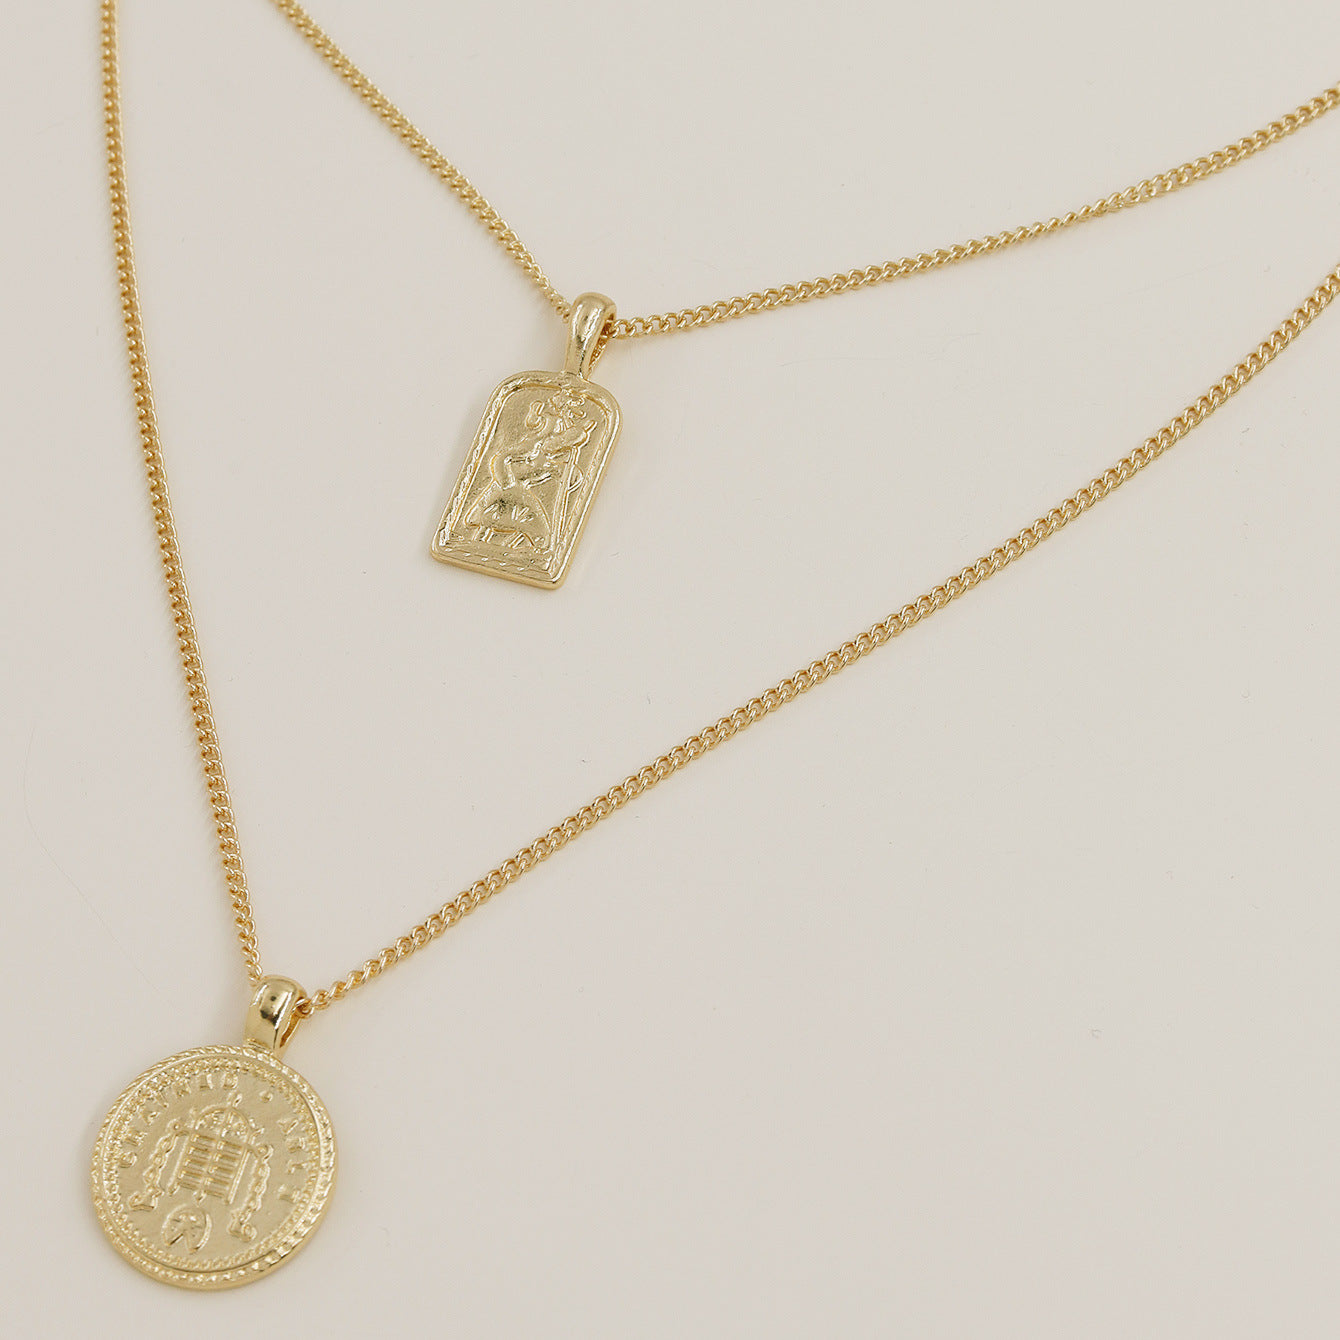 Elegant Gold Coin Pendant Necklace with Geometric Circle Design